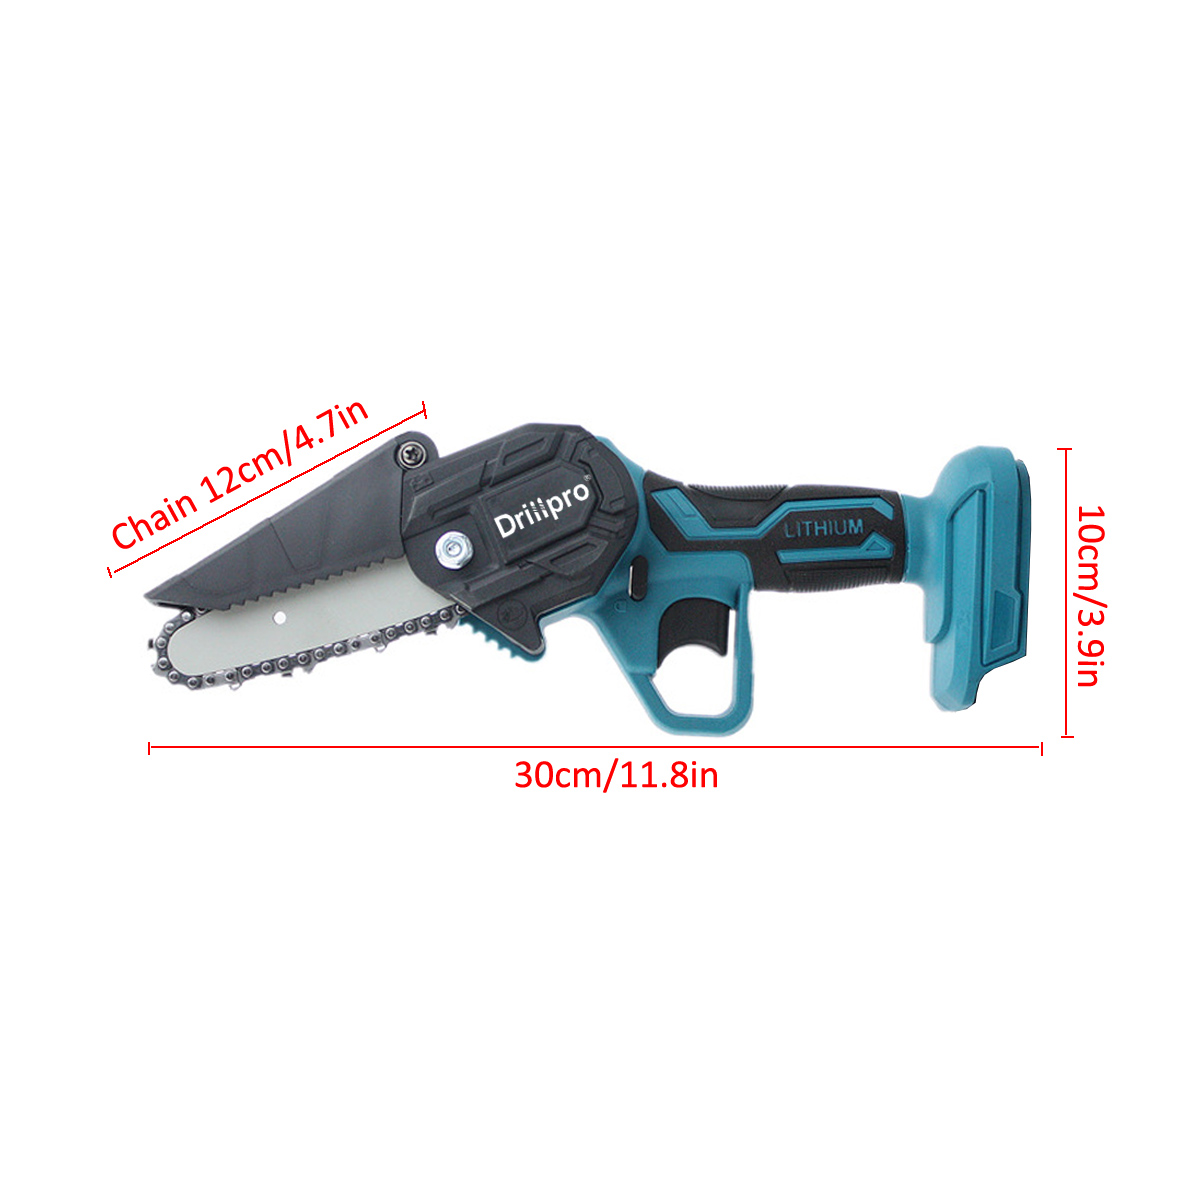 Drillpro-4-Inch-Electric-Chain-Saw-Portable-One-hand-Saw-Wood-Cutter-for-Makita-18V-Battery-1804667-8